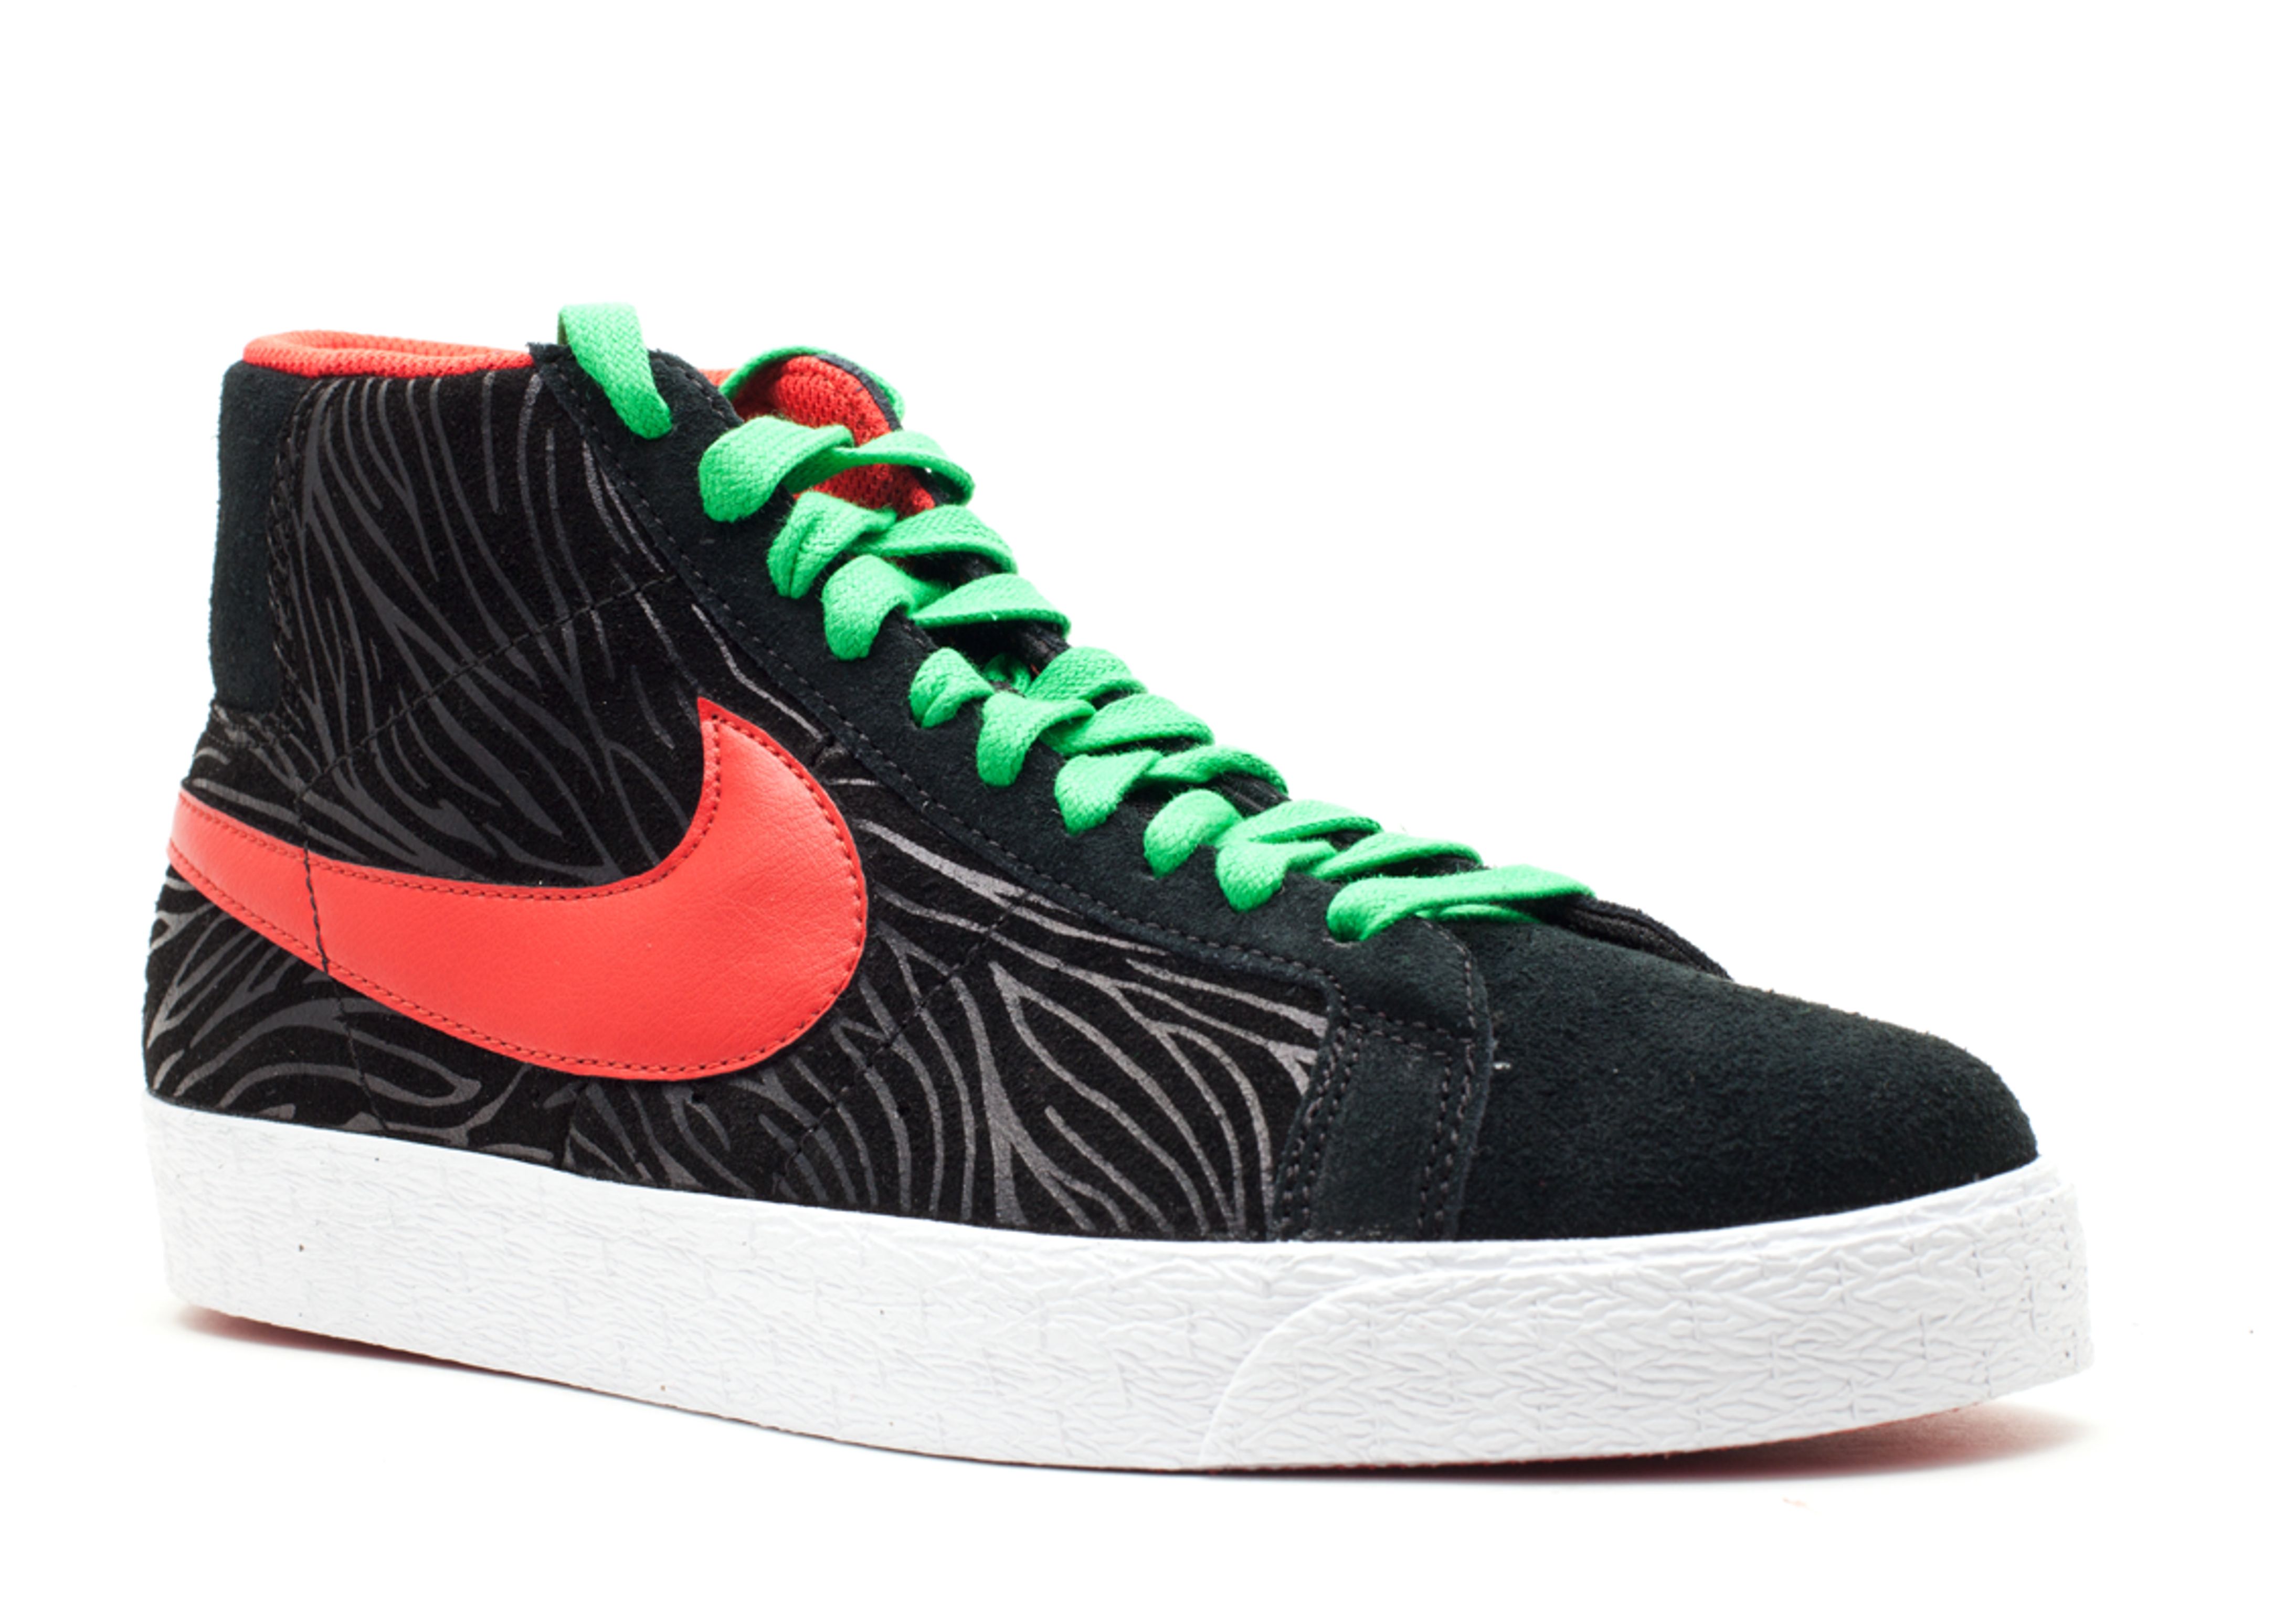 tribe called quest nike dunks